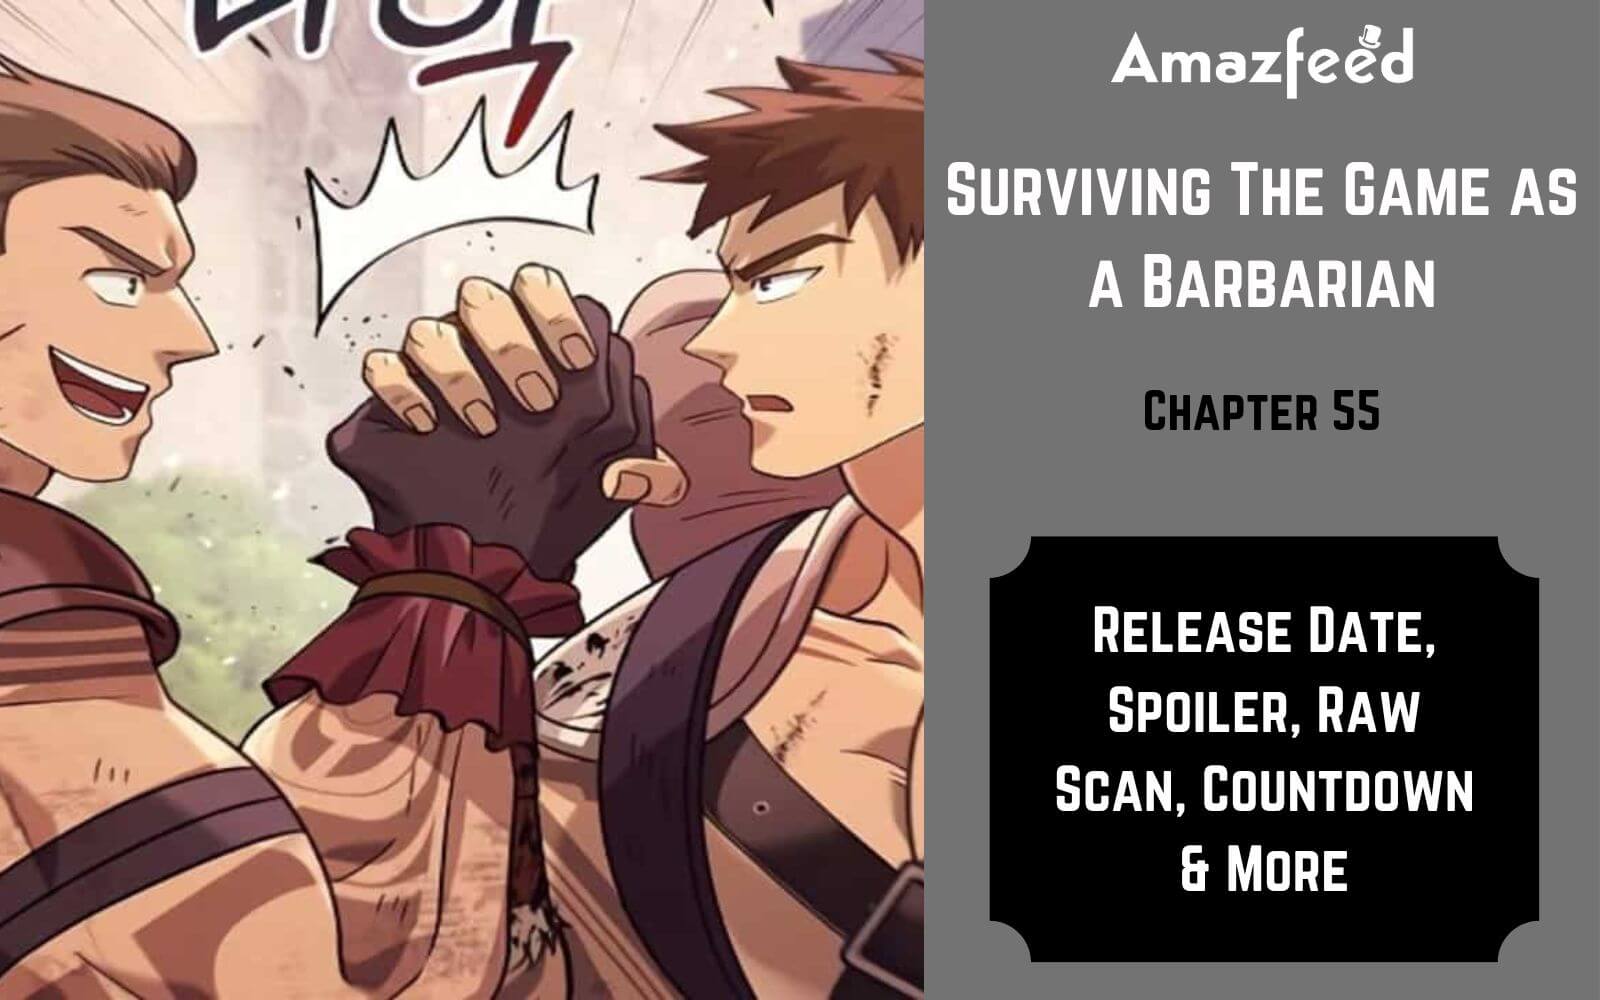 Surviving The Game as a Barbaria chapter 55